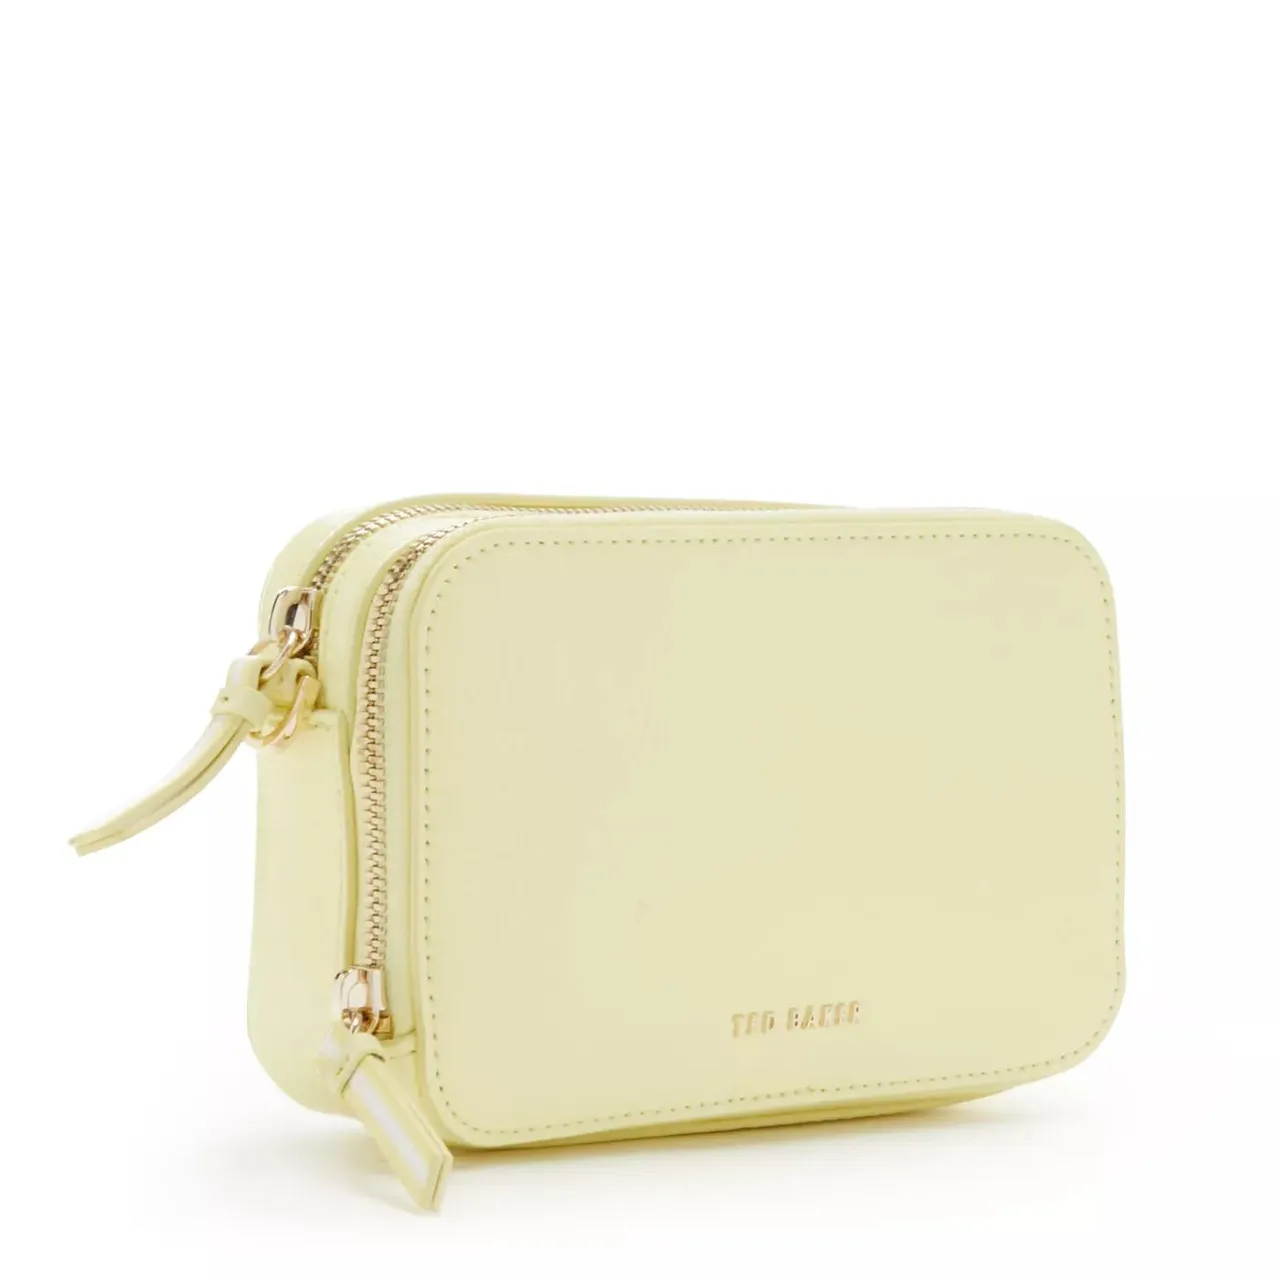 Ted Baker Crossbody Bags - Ted Baker Stunnie Gelbe Leder Umhängetasche TB2737 - yellow - Crossbody Bags for ladies